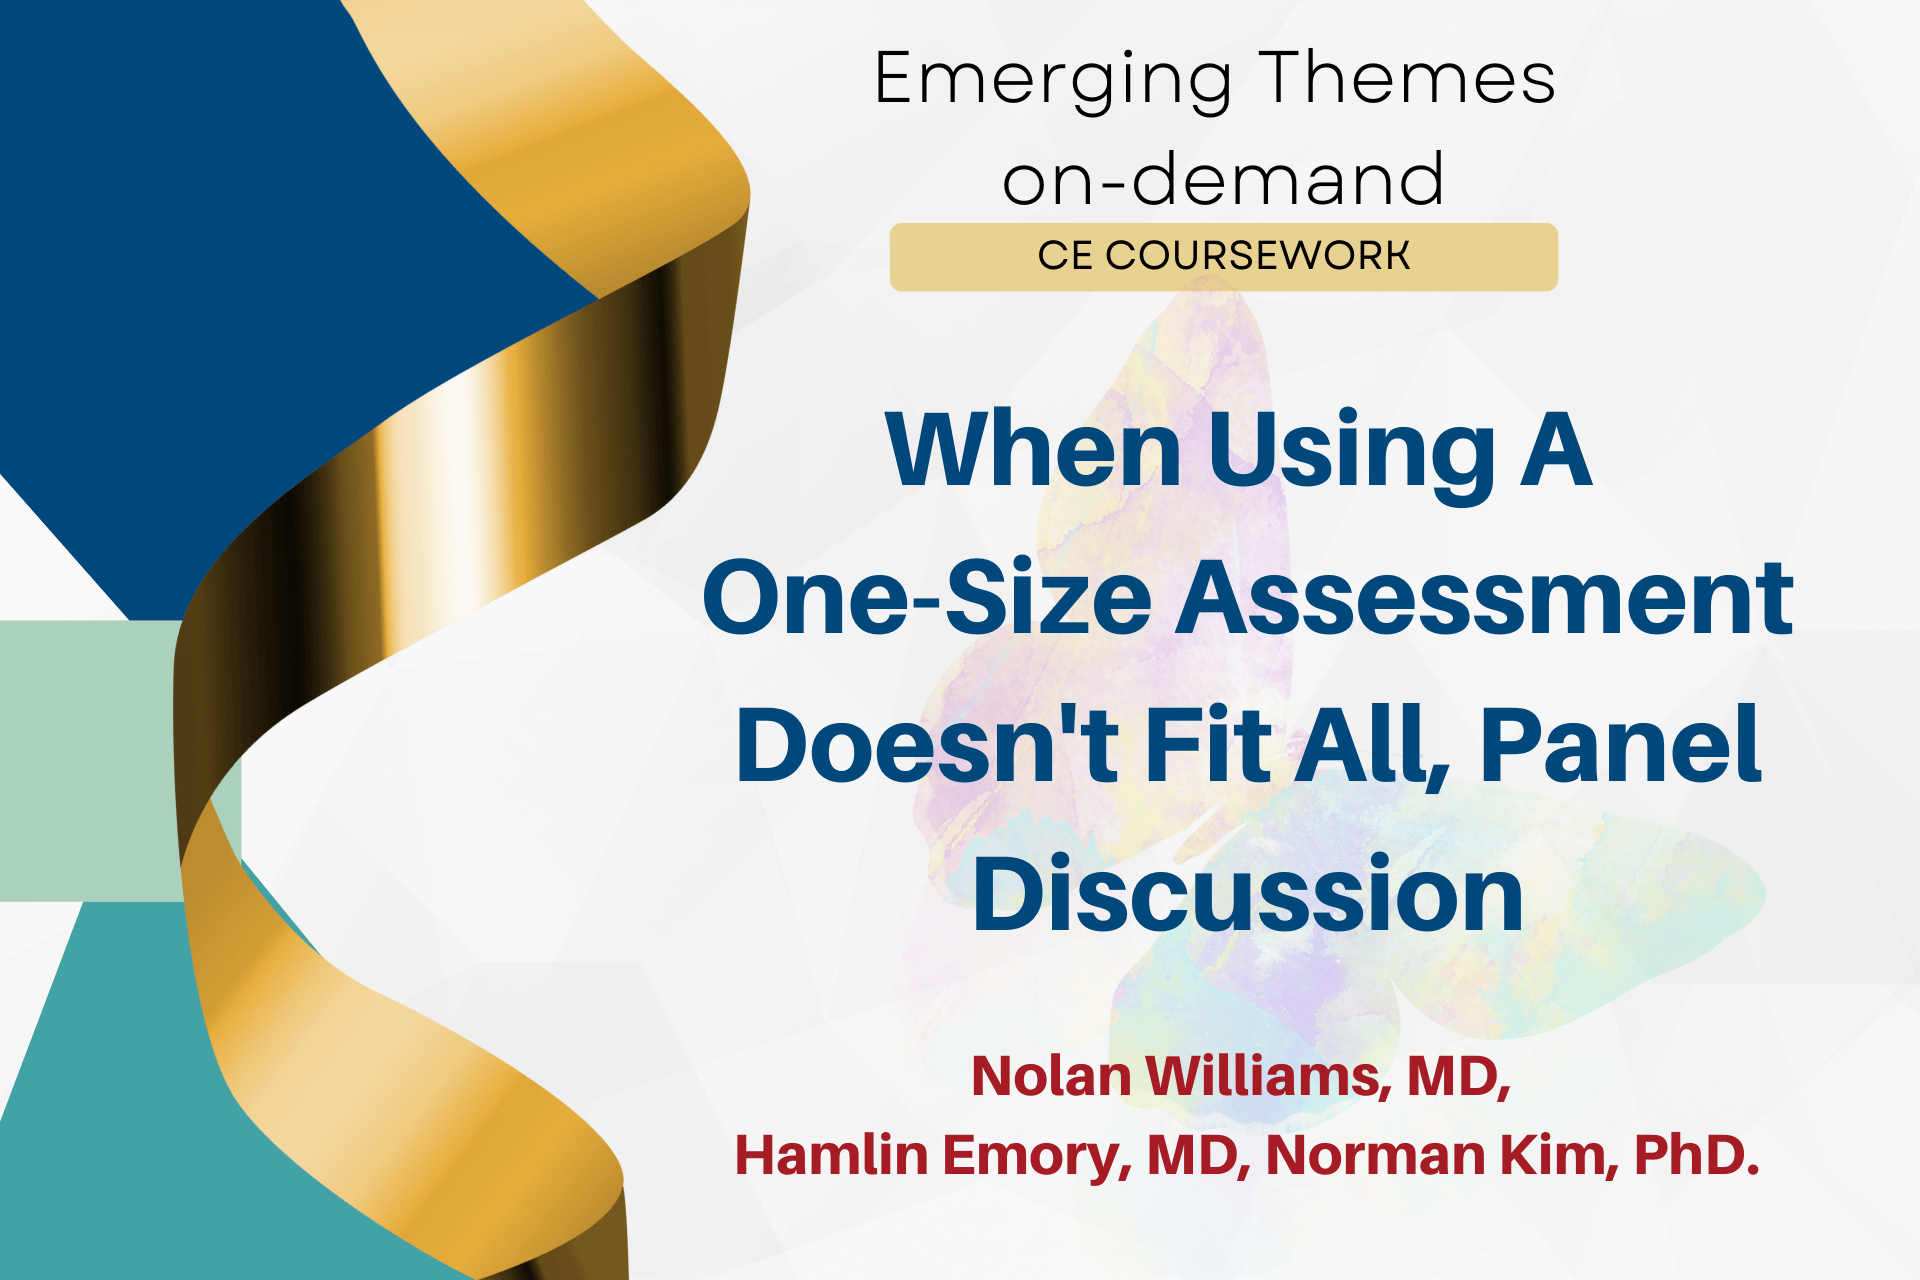 When Using A One-Size Assessment Doesn't Fit All Panel Discussion